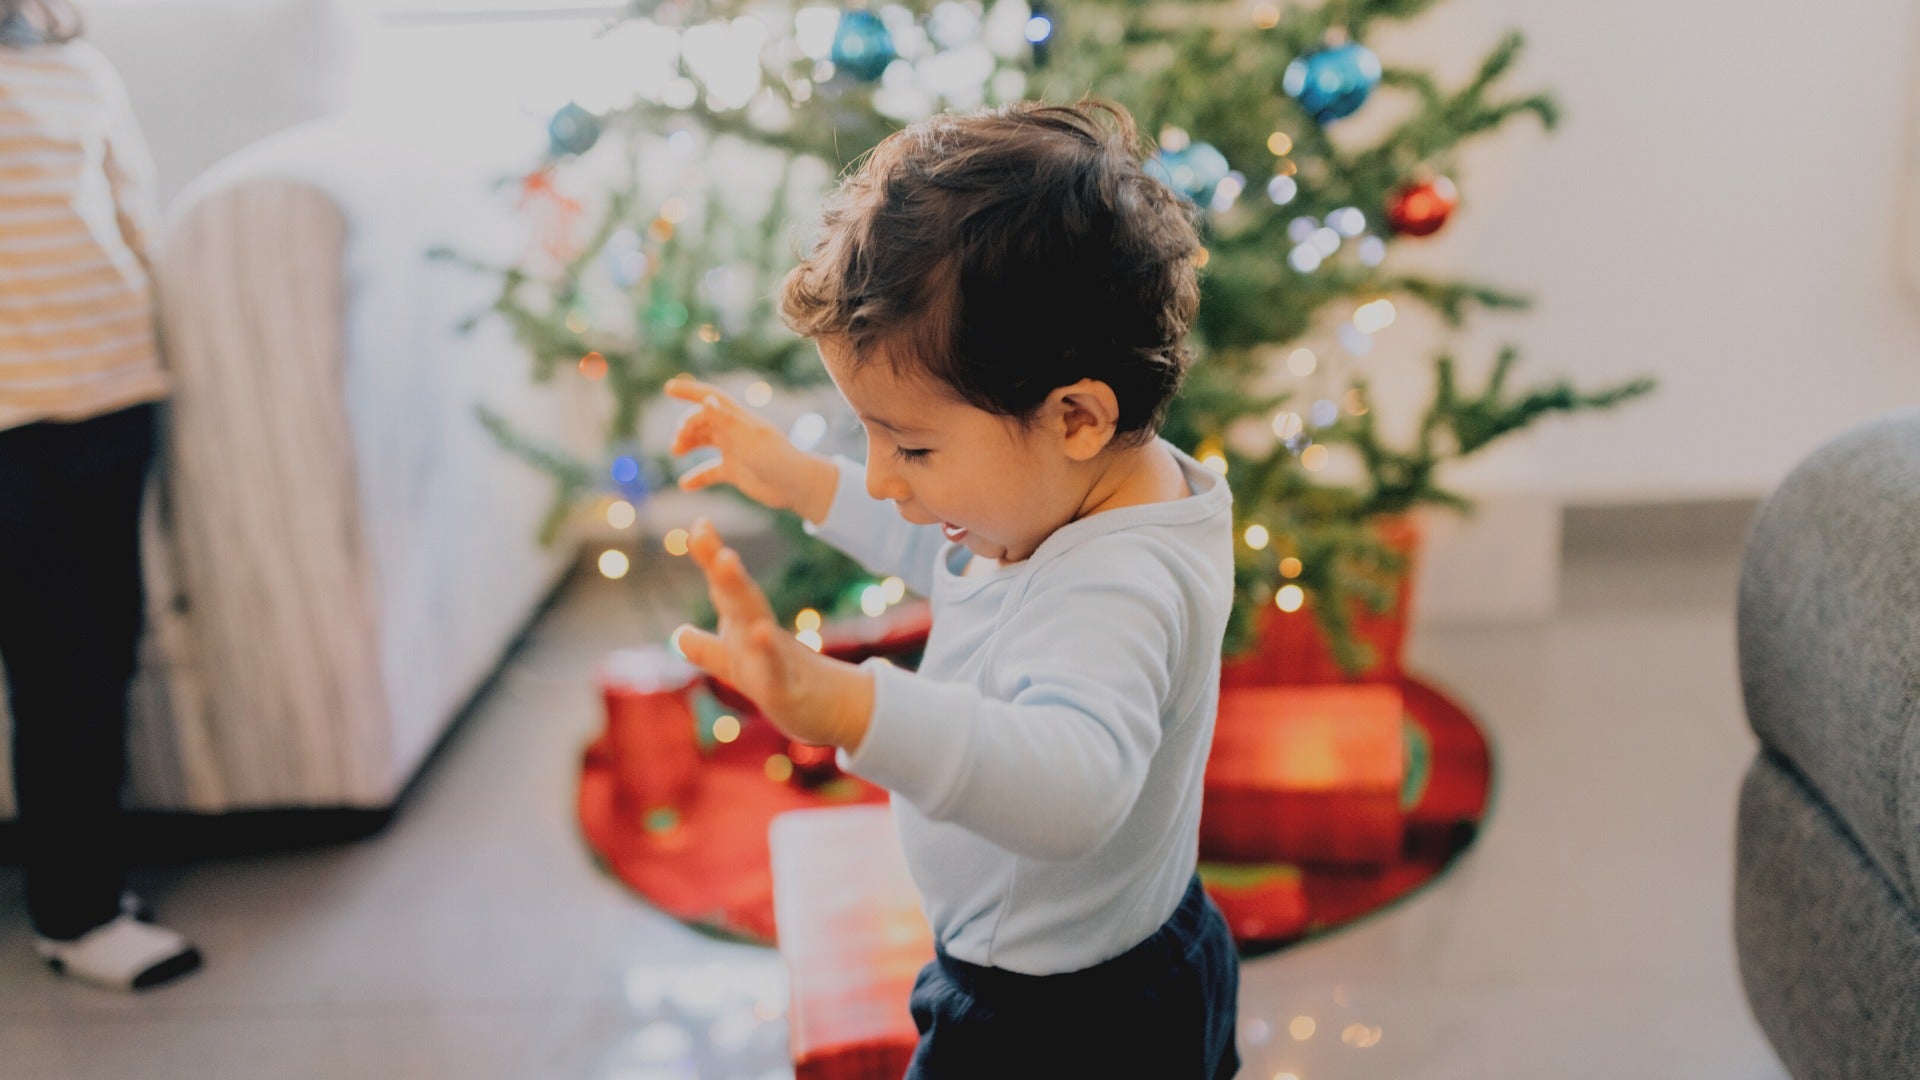 How to Have a Merry Montessori Christmas?